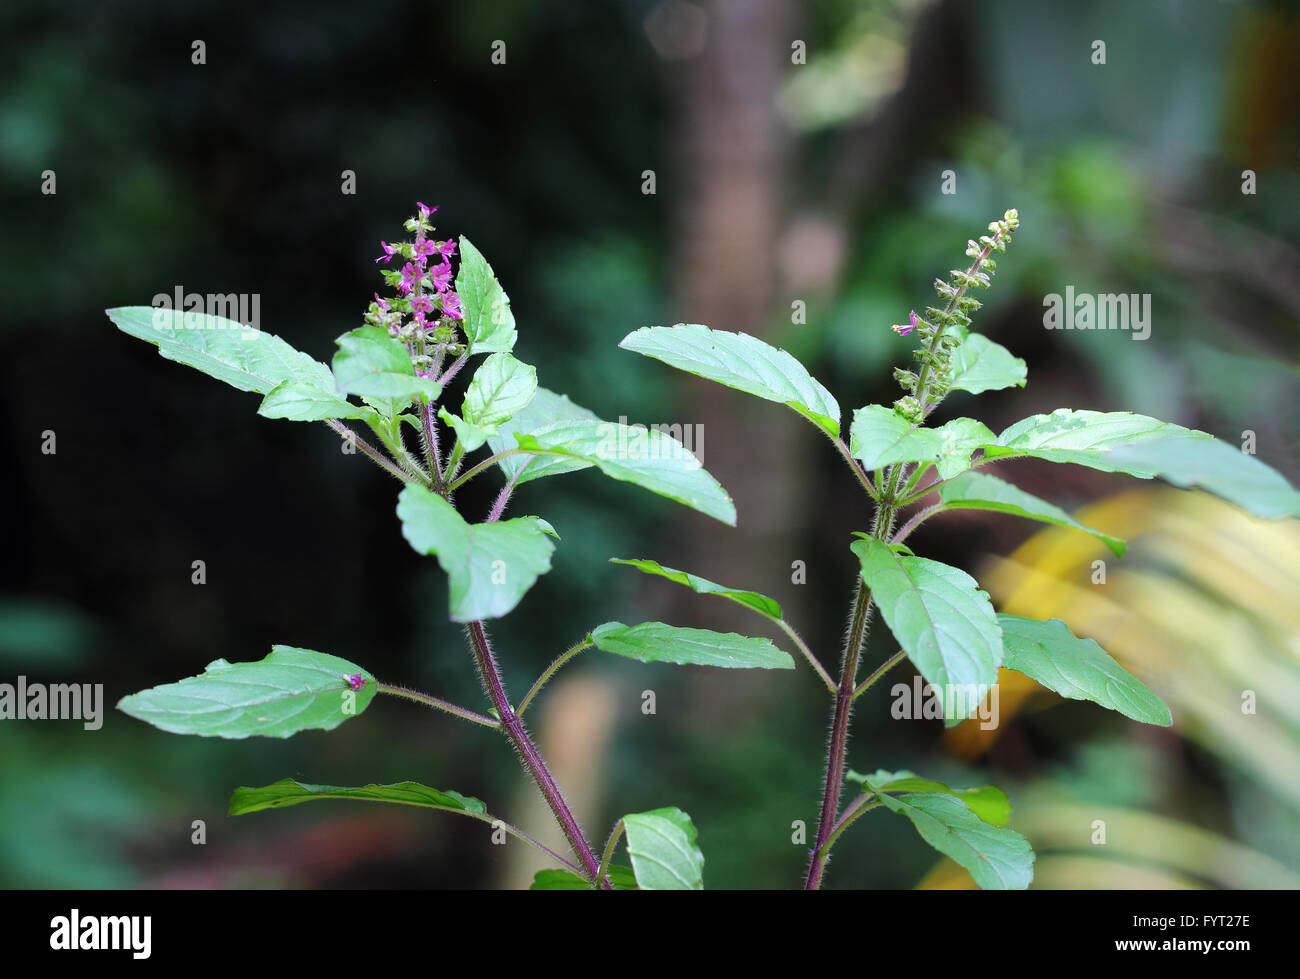 Holy basil, tulsi, is an aromatic plant cultivated for religious and medicinal purposes, and for essential oils. Stock Photo